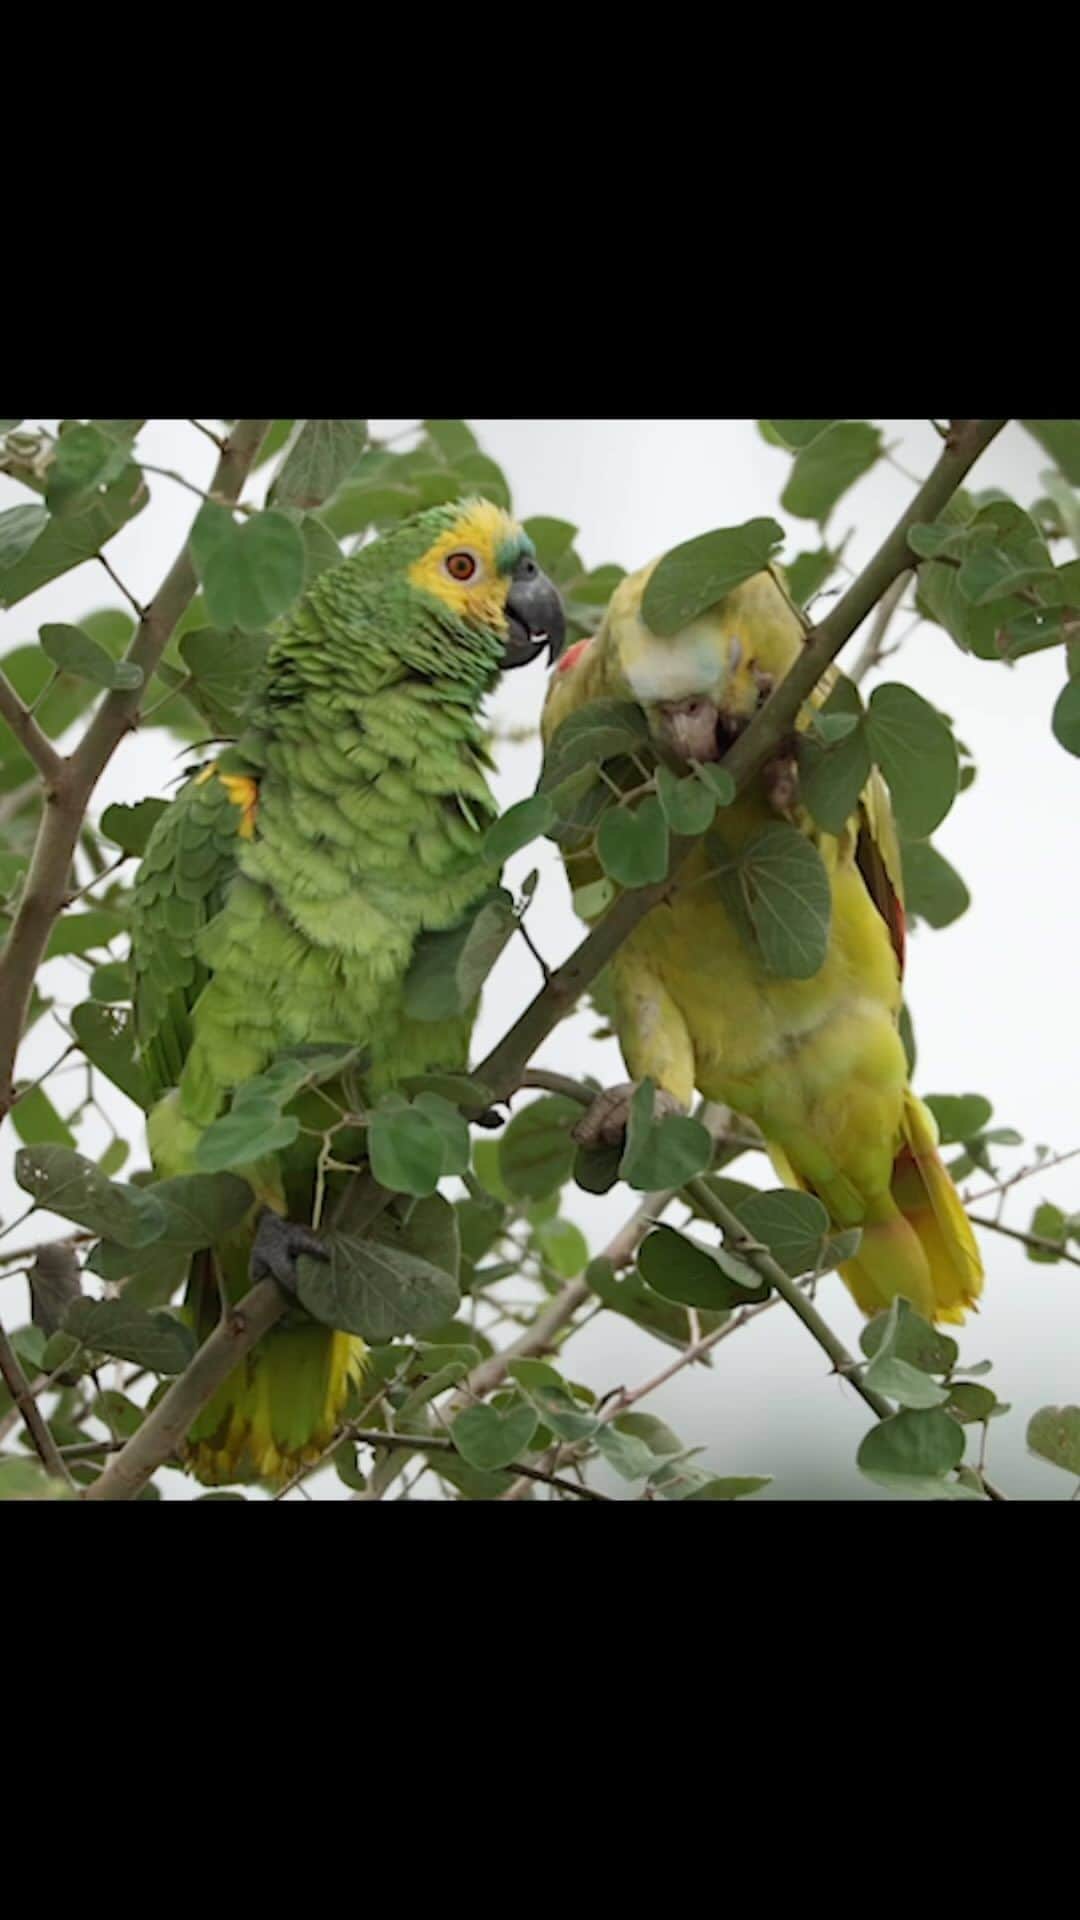 Keith Ladzinskiのインスタグラム：「A pair of Blue-fronted Parrots preening one another in the Pantanal. The yellower parrot here is leucistic, meaning it’s lacking in melanin which affects its overall pigment. Spotting this unique pair was a great way to start the morning alongside @timlaman @tjtriage @erichroepke @mindframecinema  - #Bluefrontedparrot #leucistic #albino #pantanal」